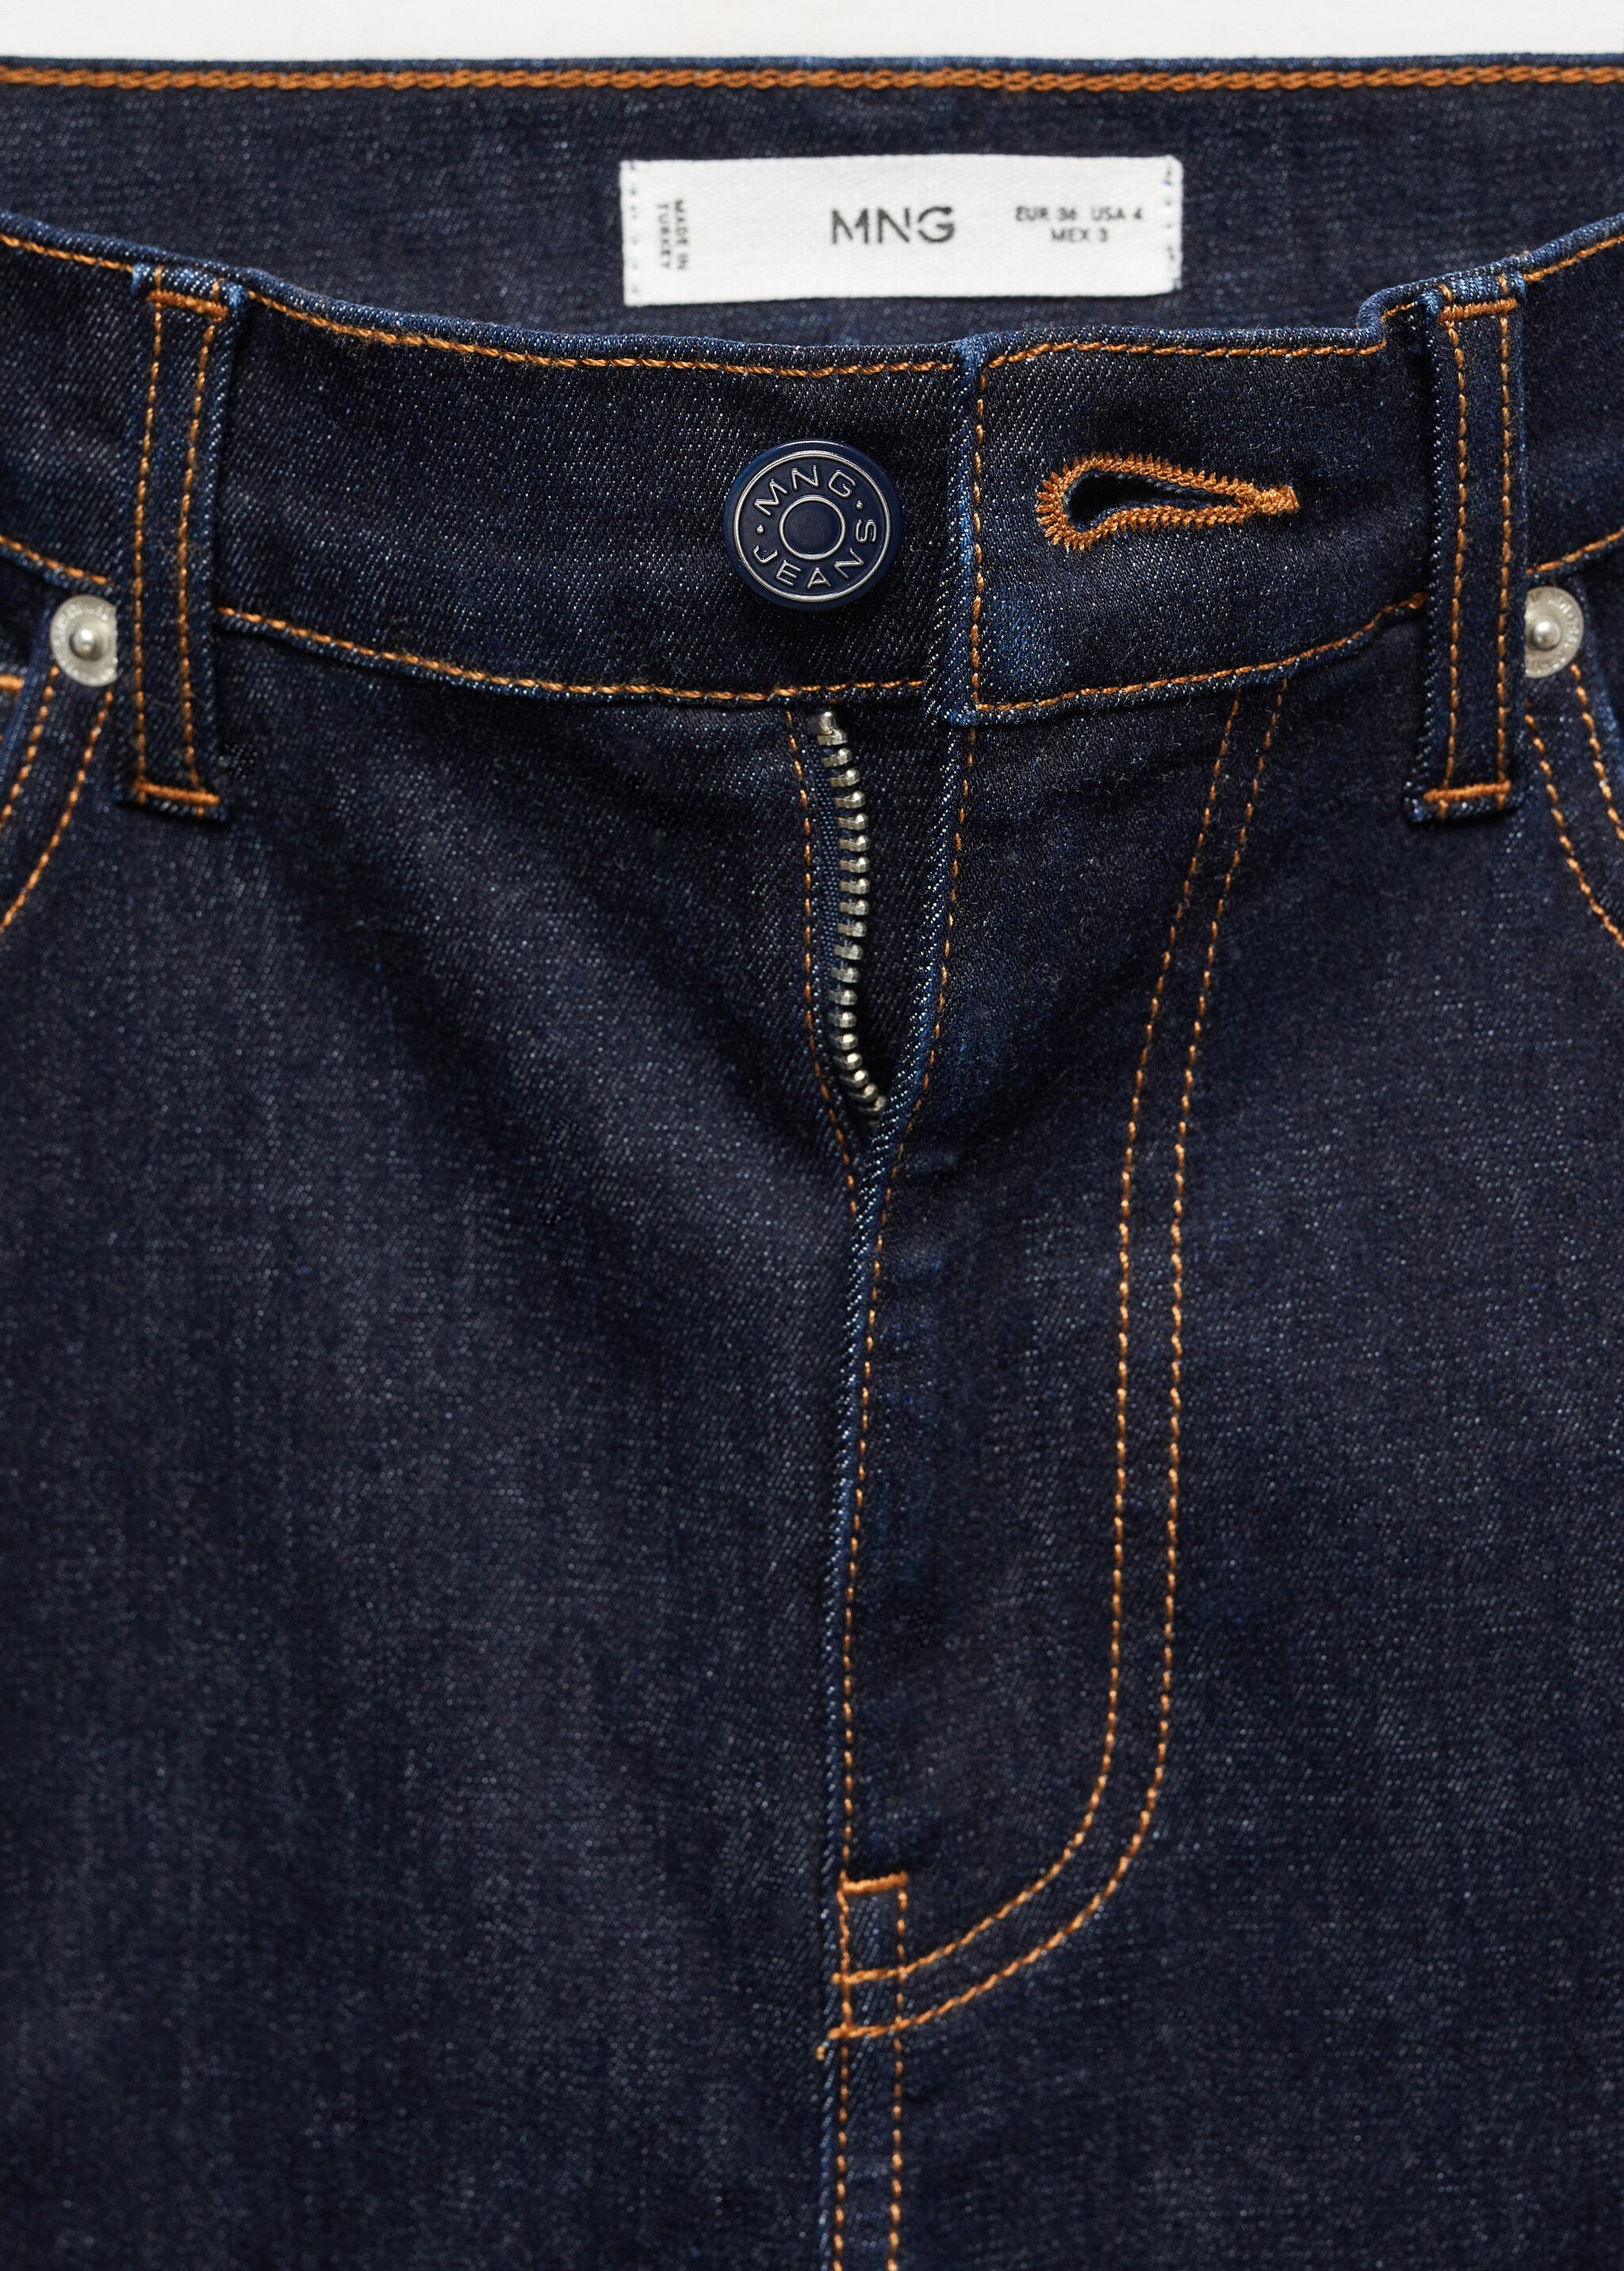  Side opening capri jeans - Details of the article 8